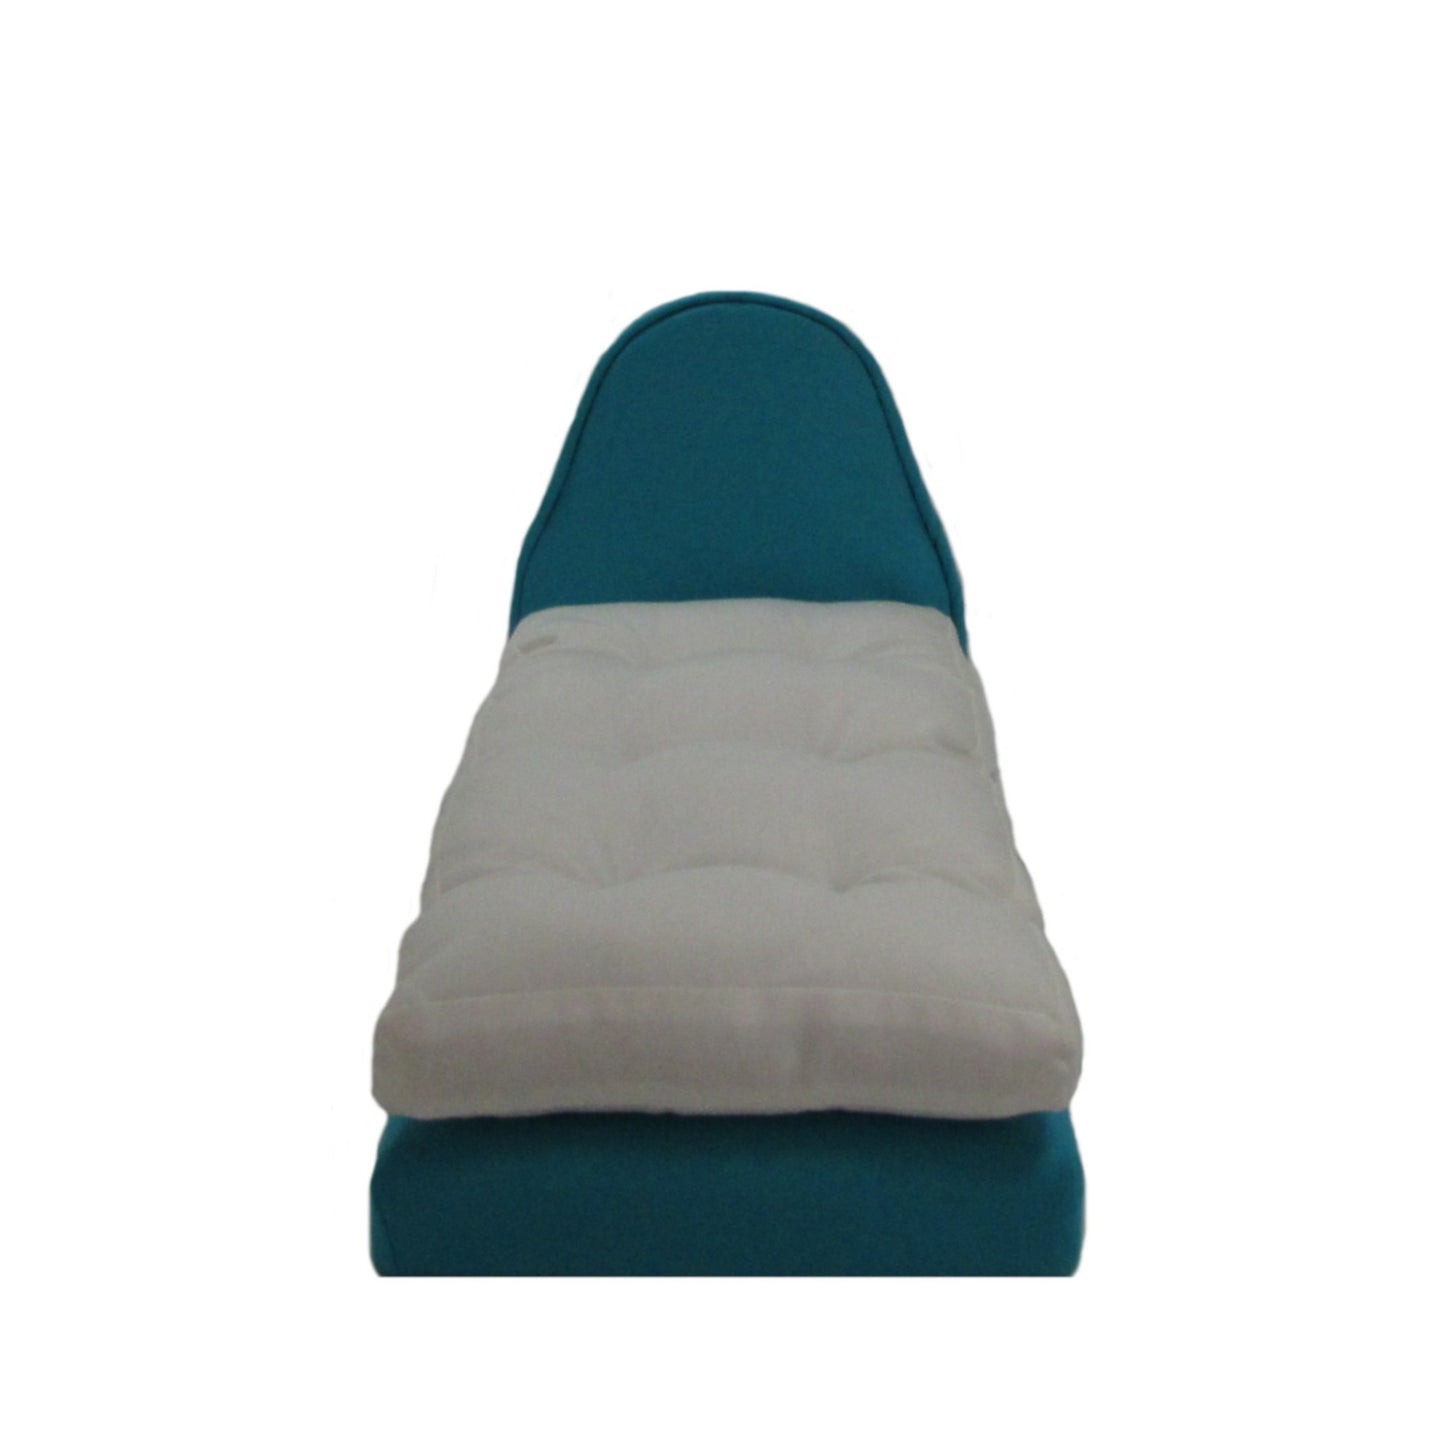 Upholstered Turquoise Doll Bed for 11 1/2-inch and 12-inch dolls Second view for multiple beds